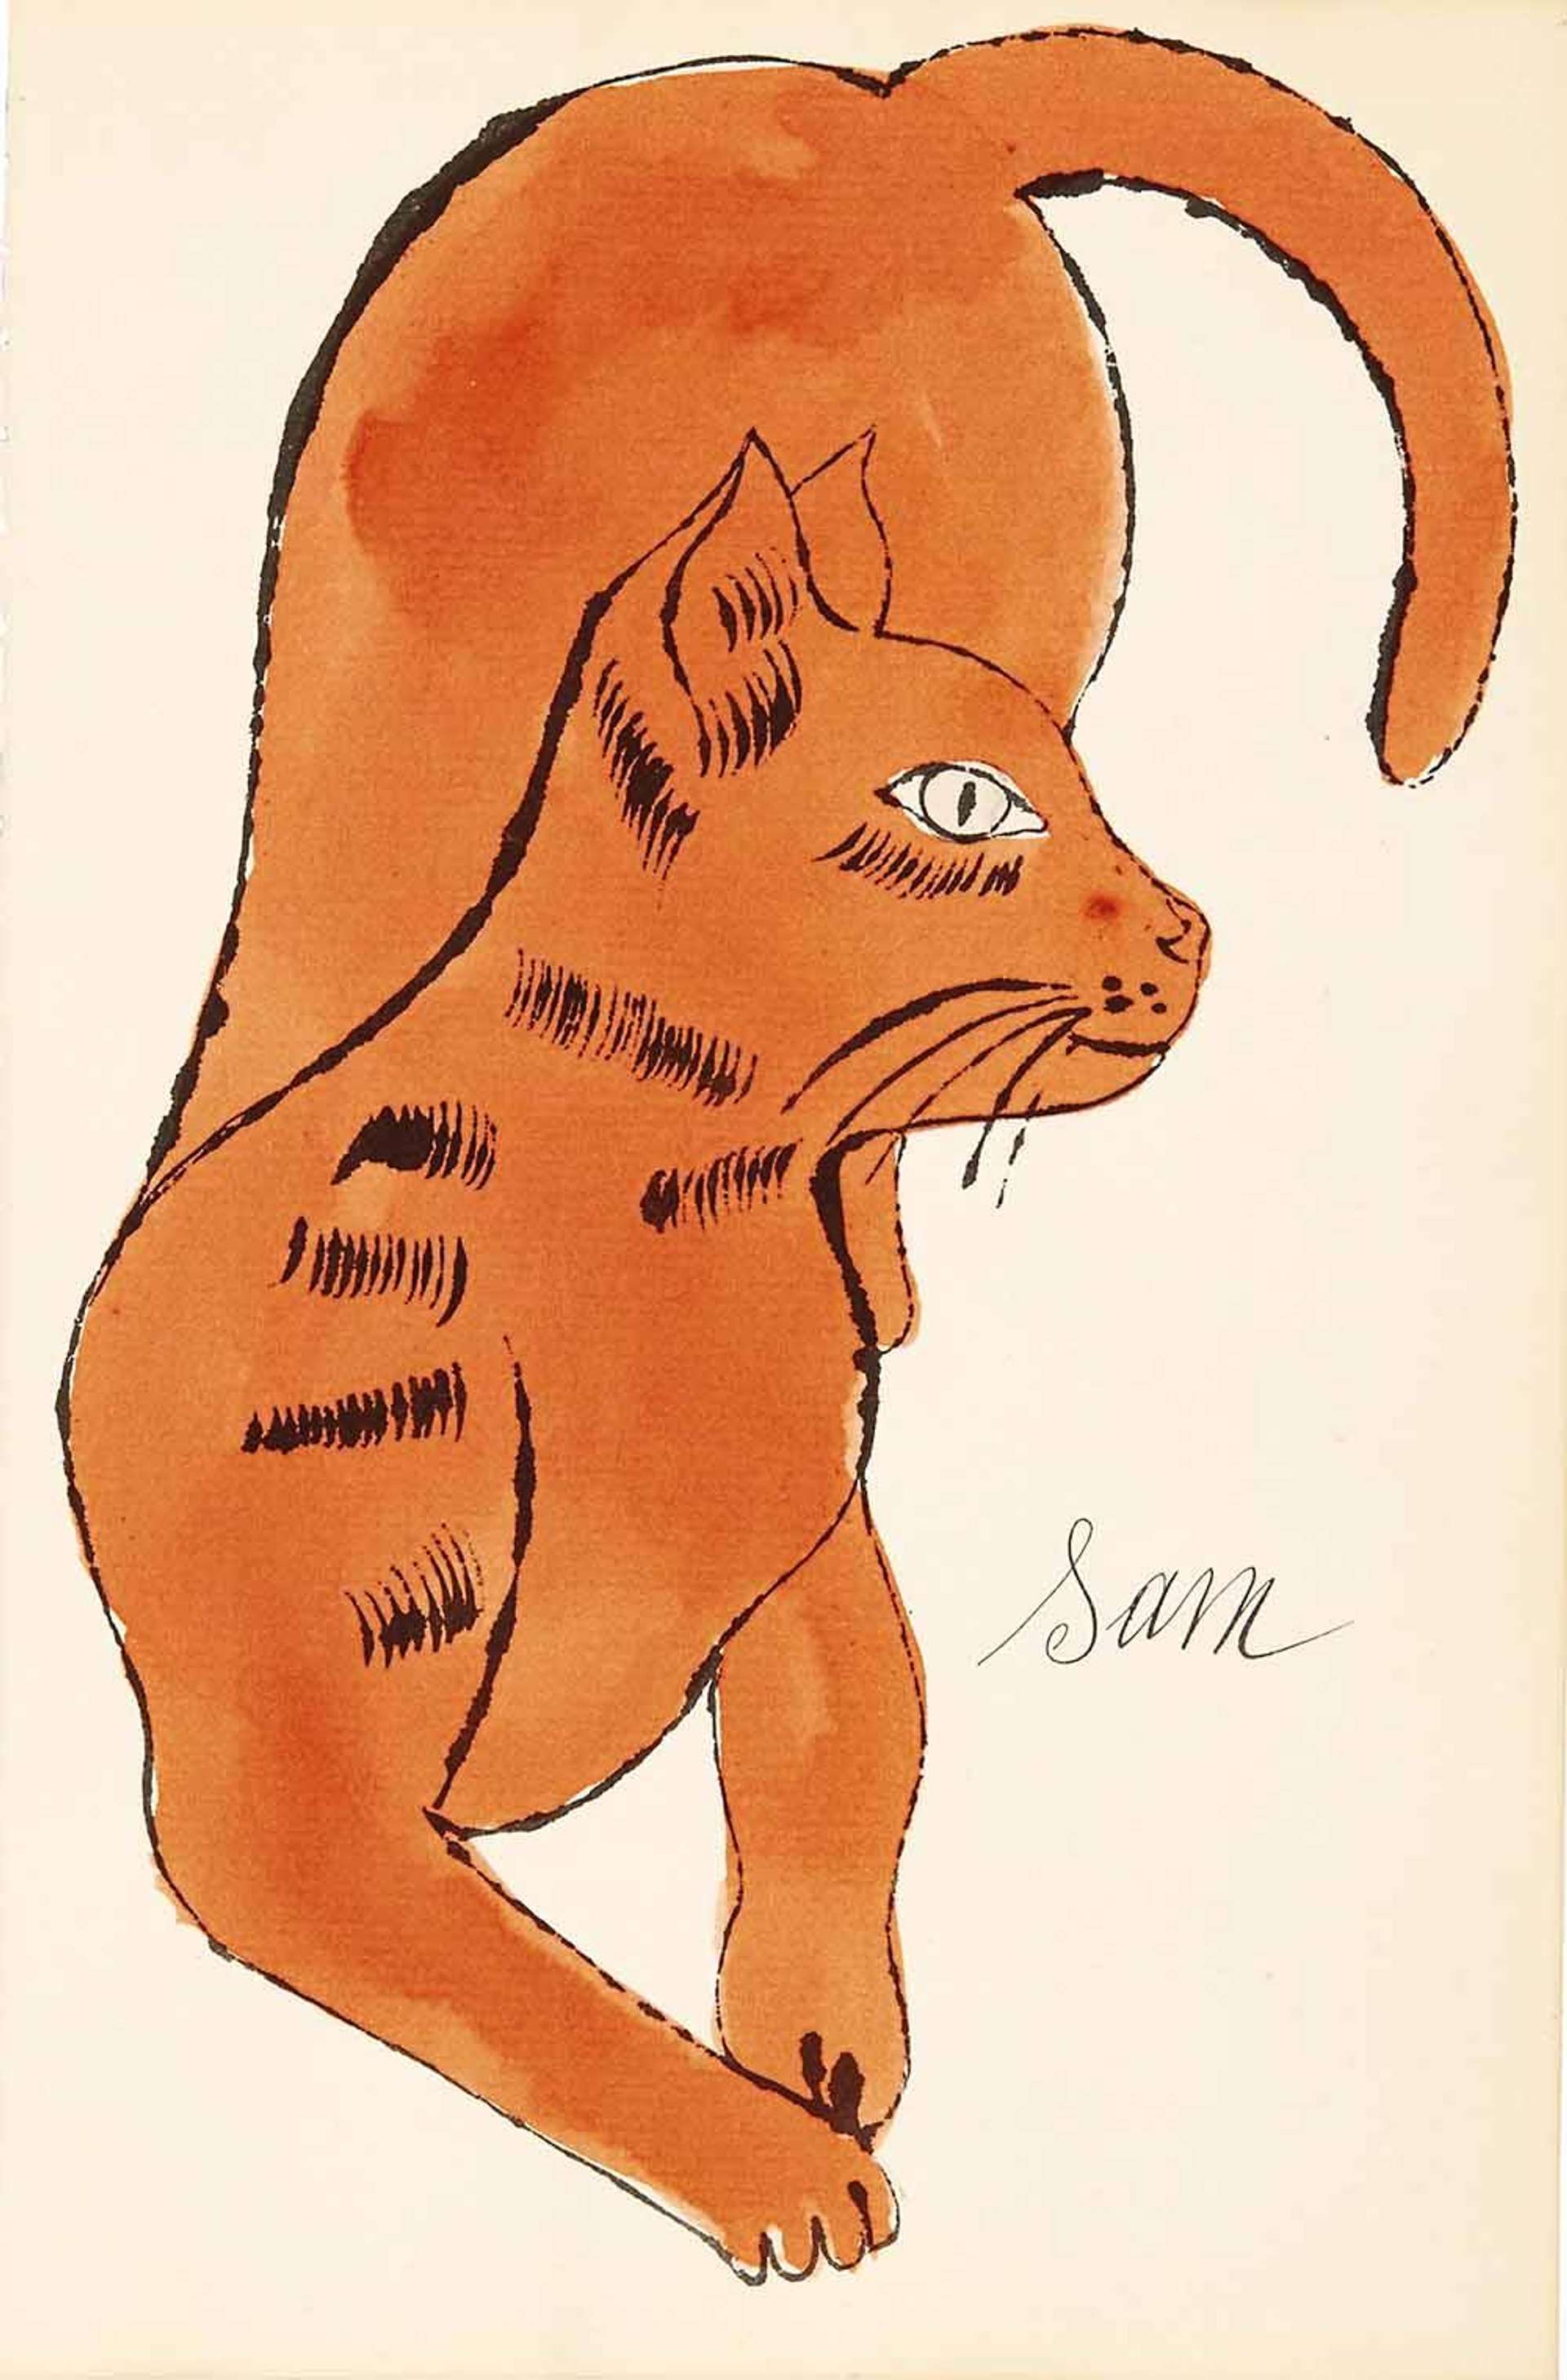 Cats Named Sam IV 65 by Andy Warhol